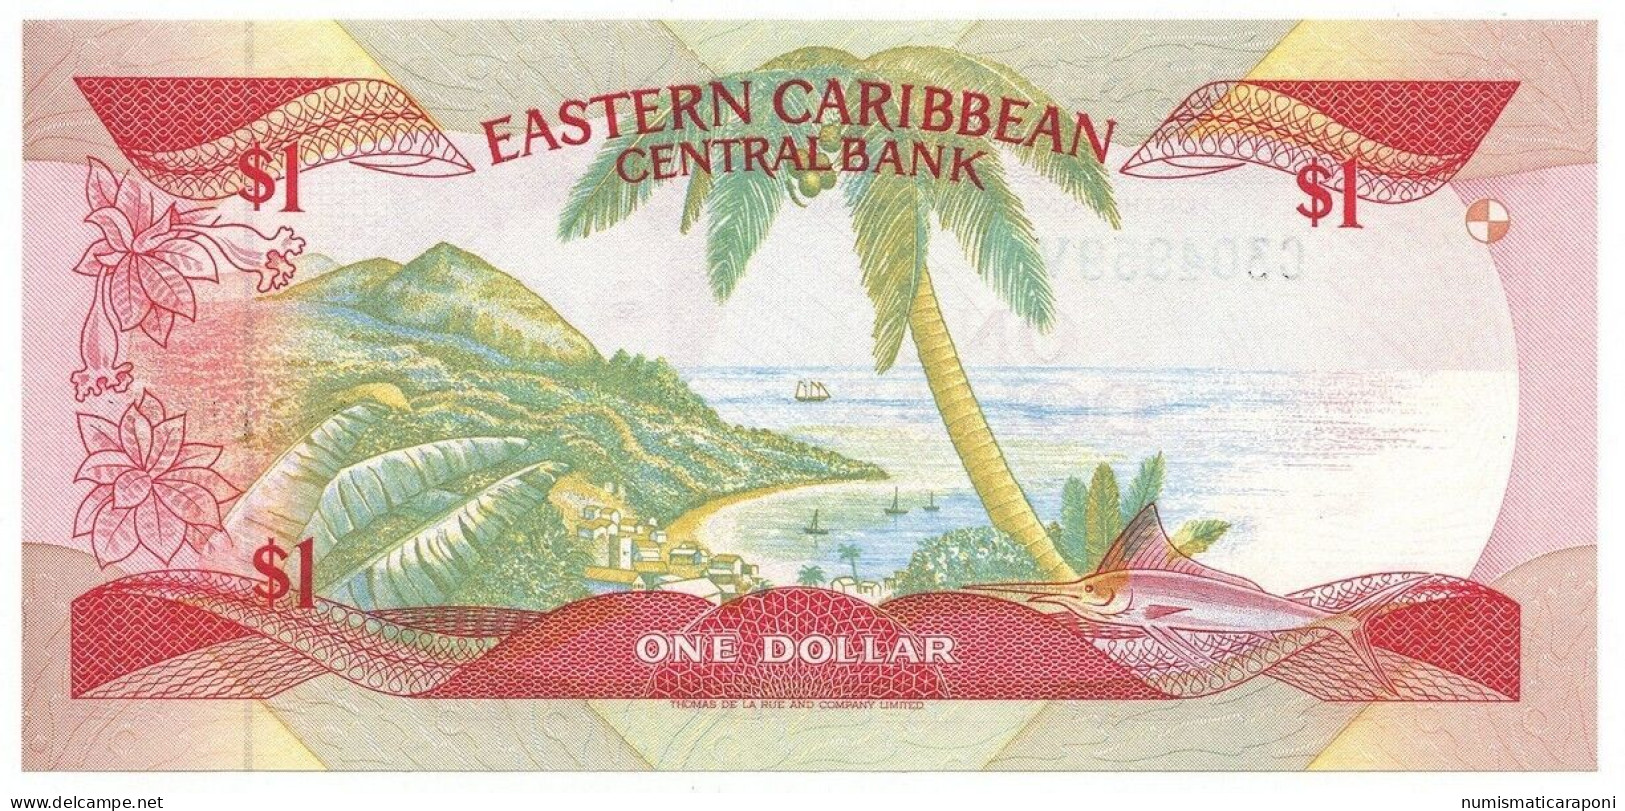 1 DOLLAR EASTERN CARIBBEAN CENTRAL BANK 1985/88 FDS Lotto.591 - East Carribeans